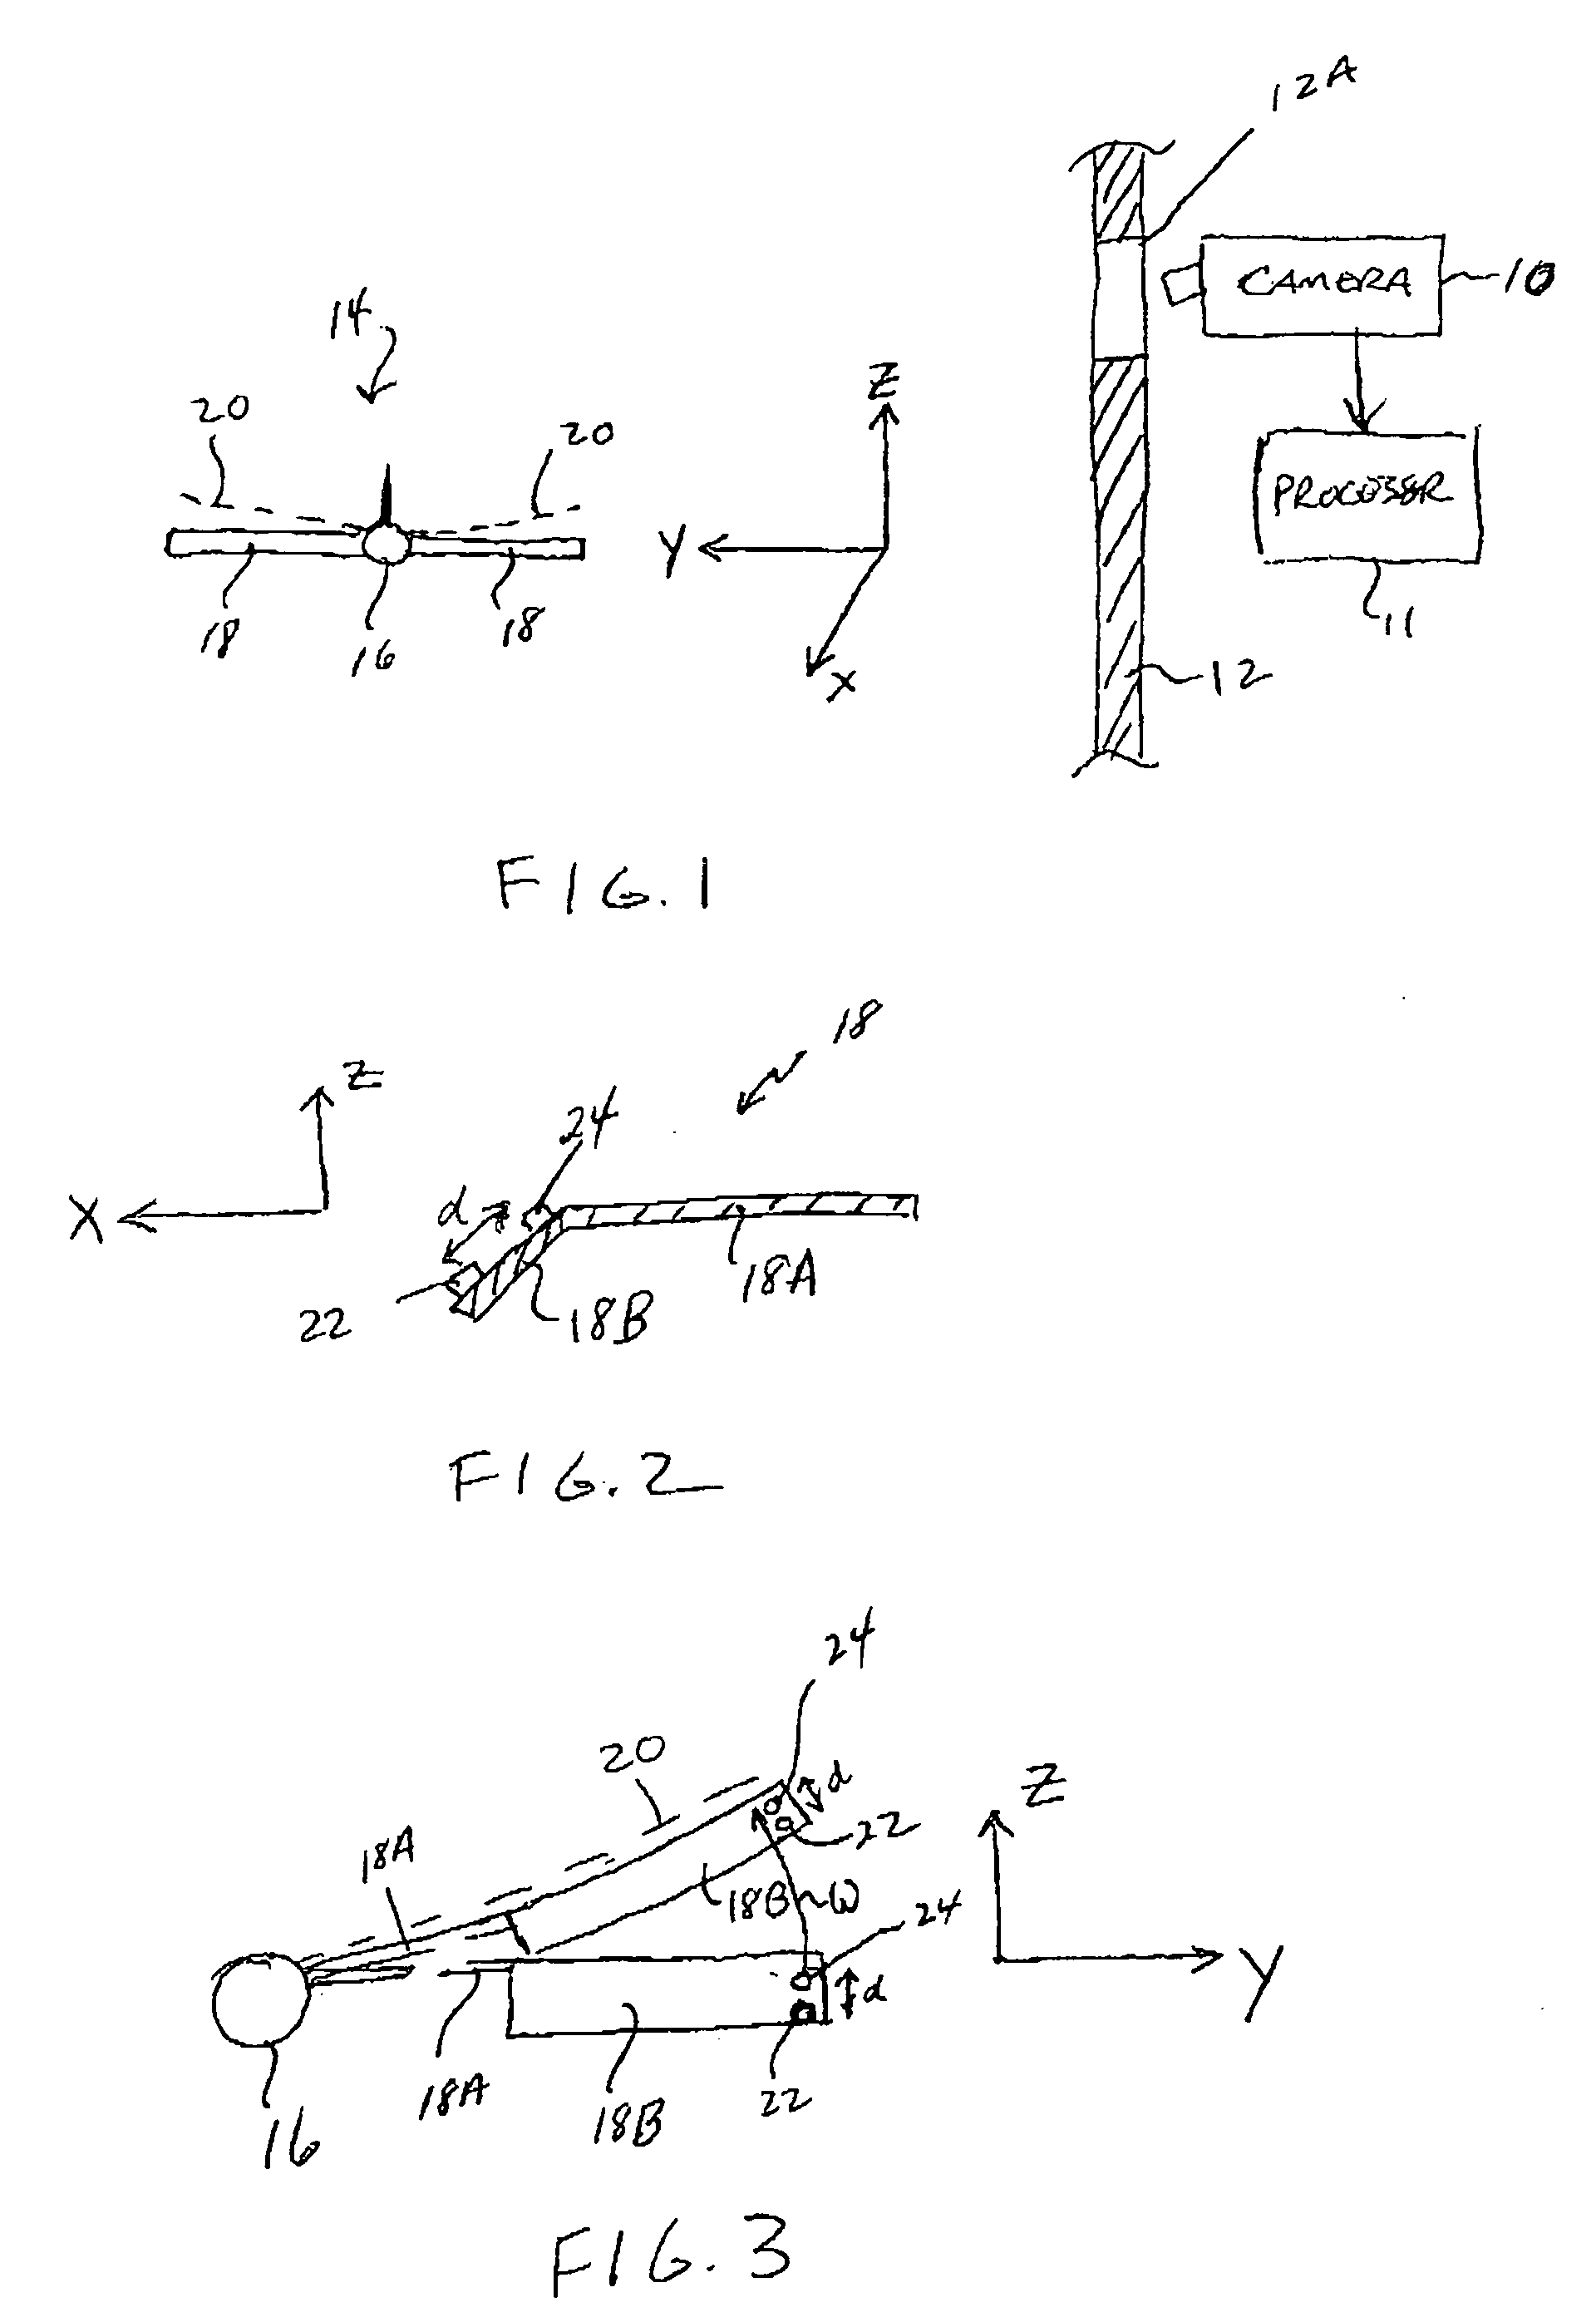 Method for correcting control surface angle measurements in single viewpoint photogrammetry